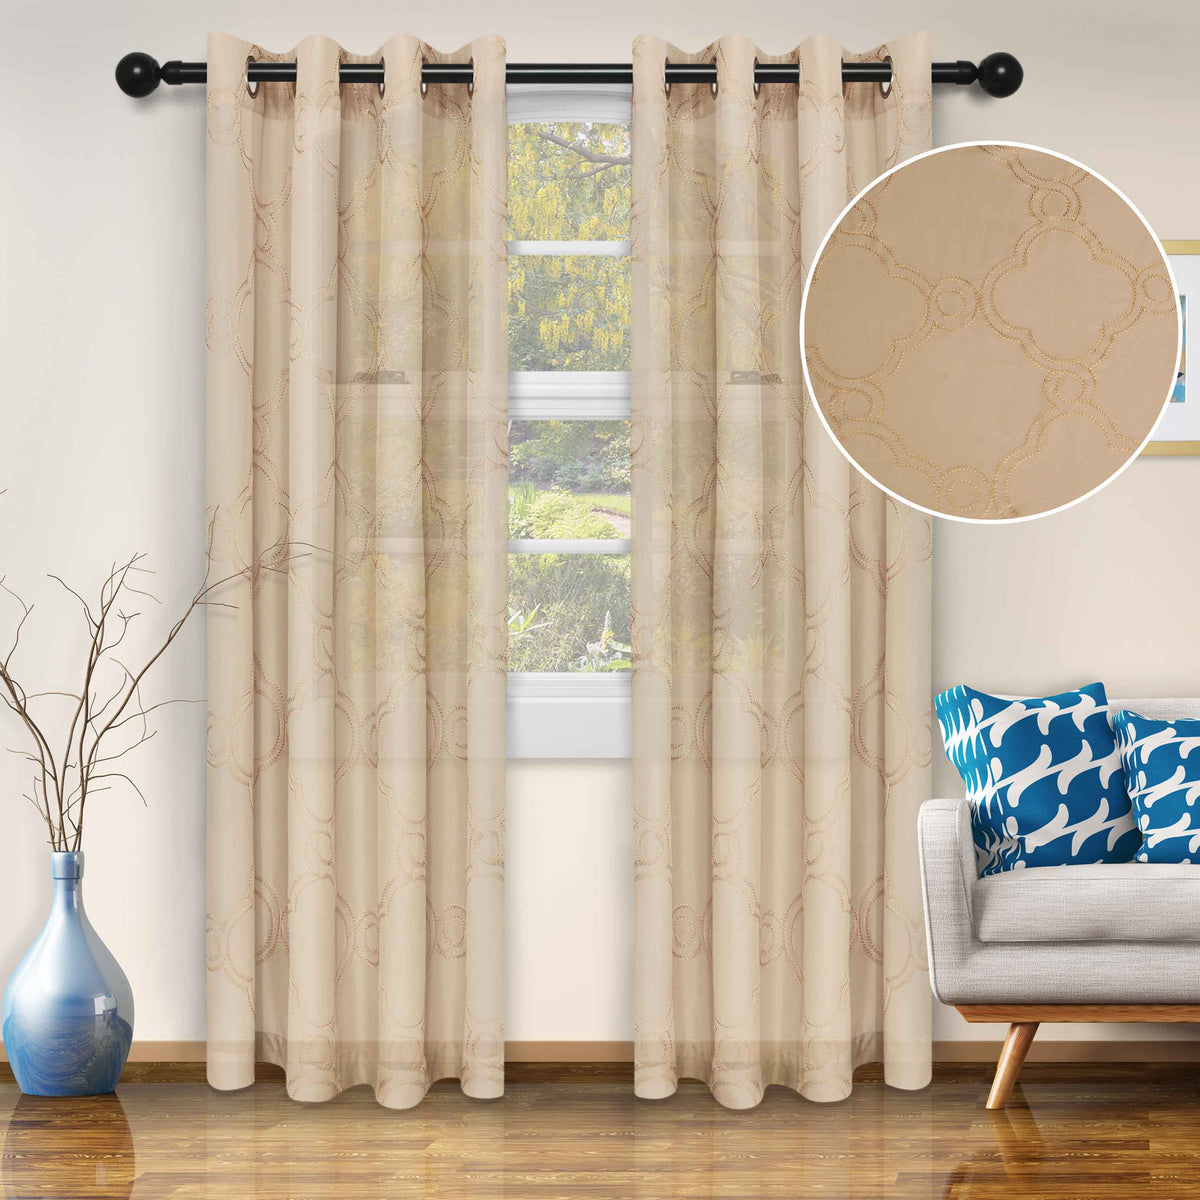 Embroidered Moroccan Sheer Grommet Curtain Panel Set